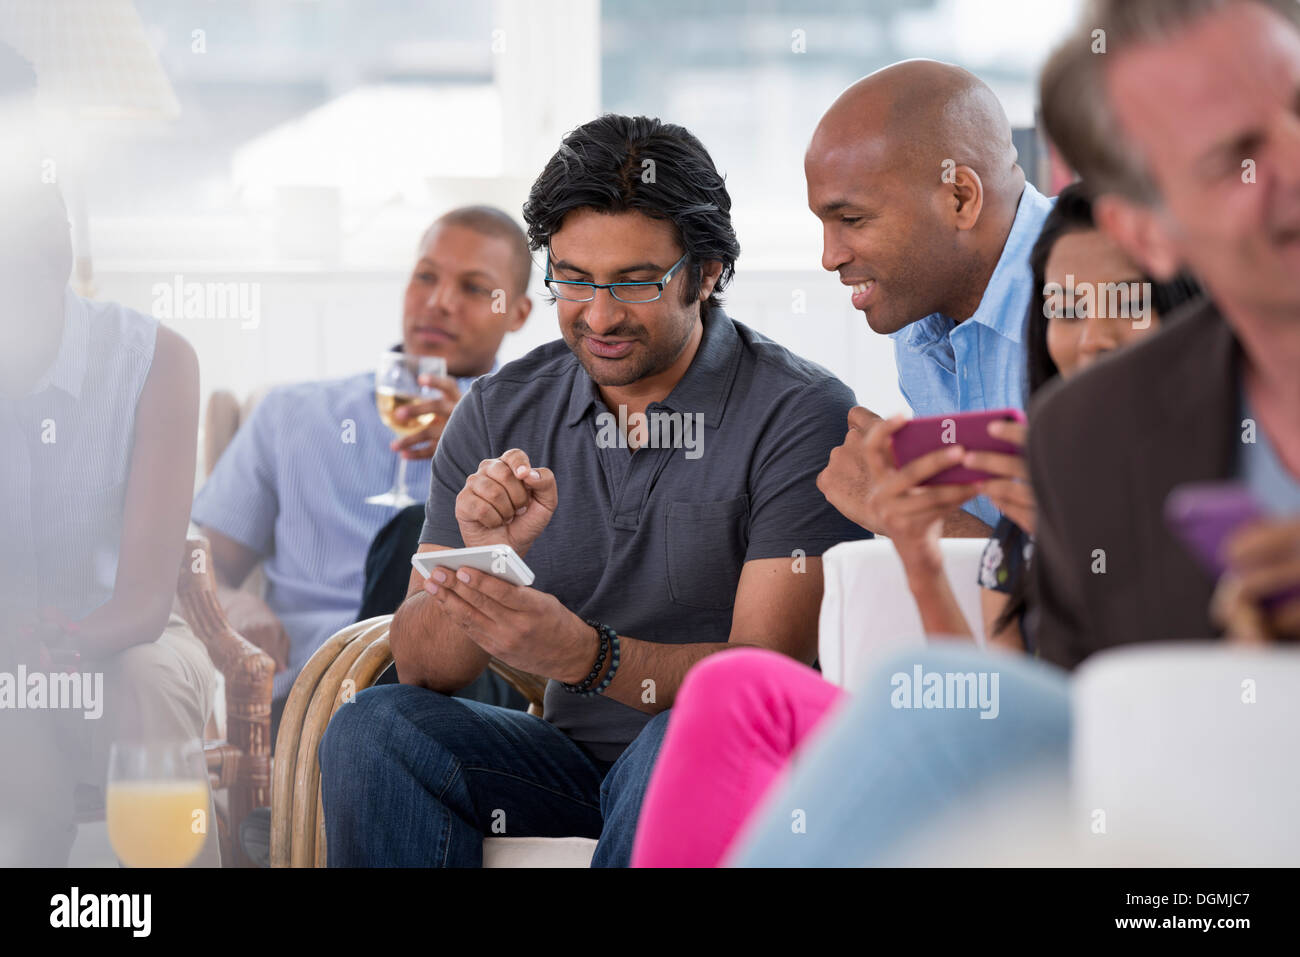 office event. A woman checking her smart phone. Stock Photo